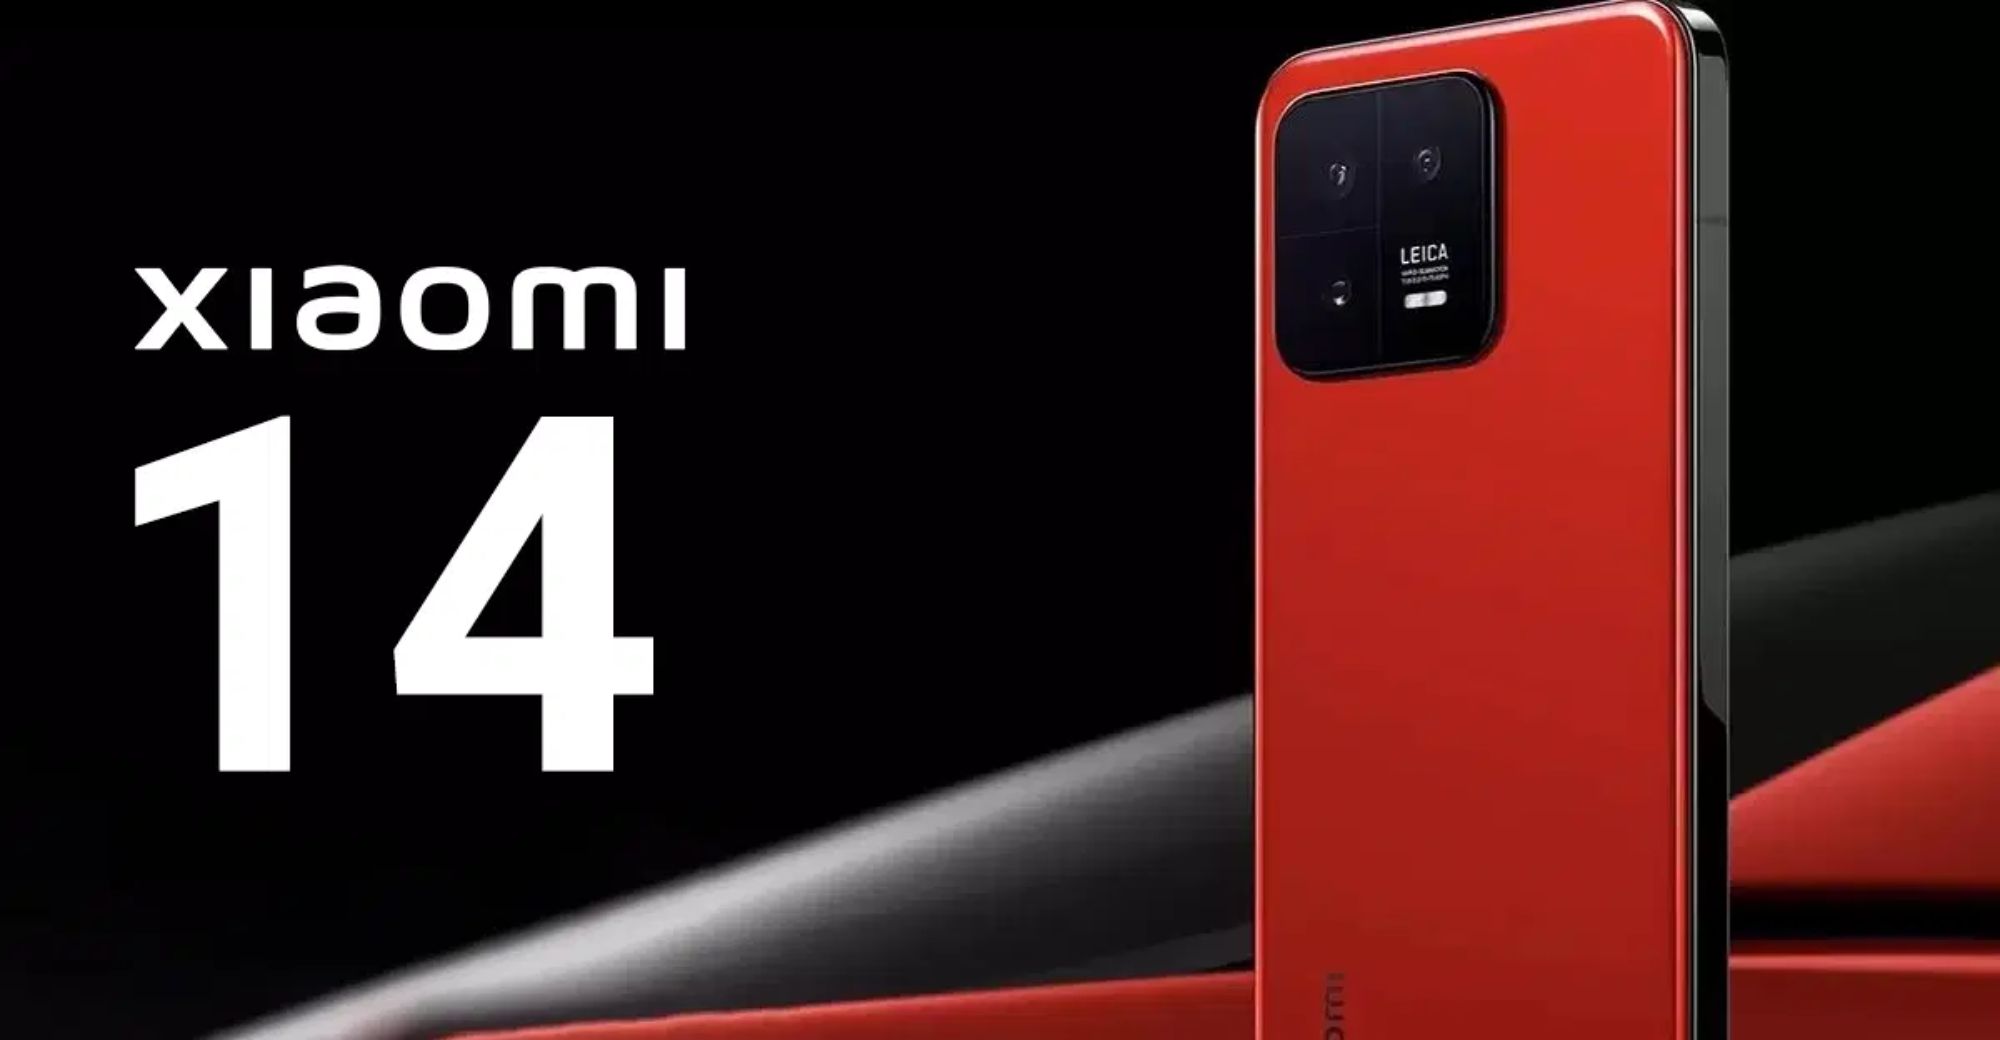 News States that Xiaomi 14 Phone Will Be Released on October 27th